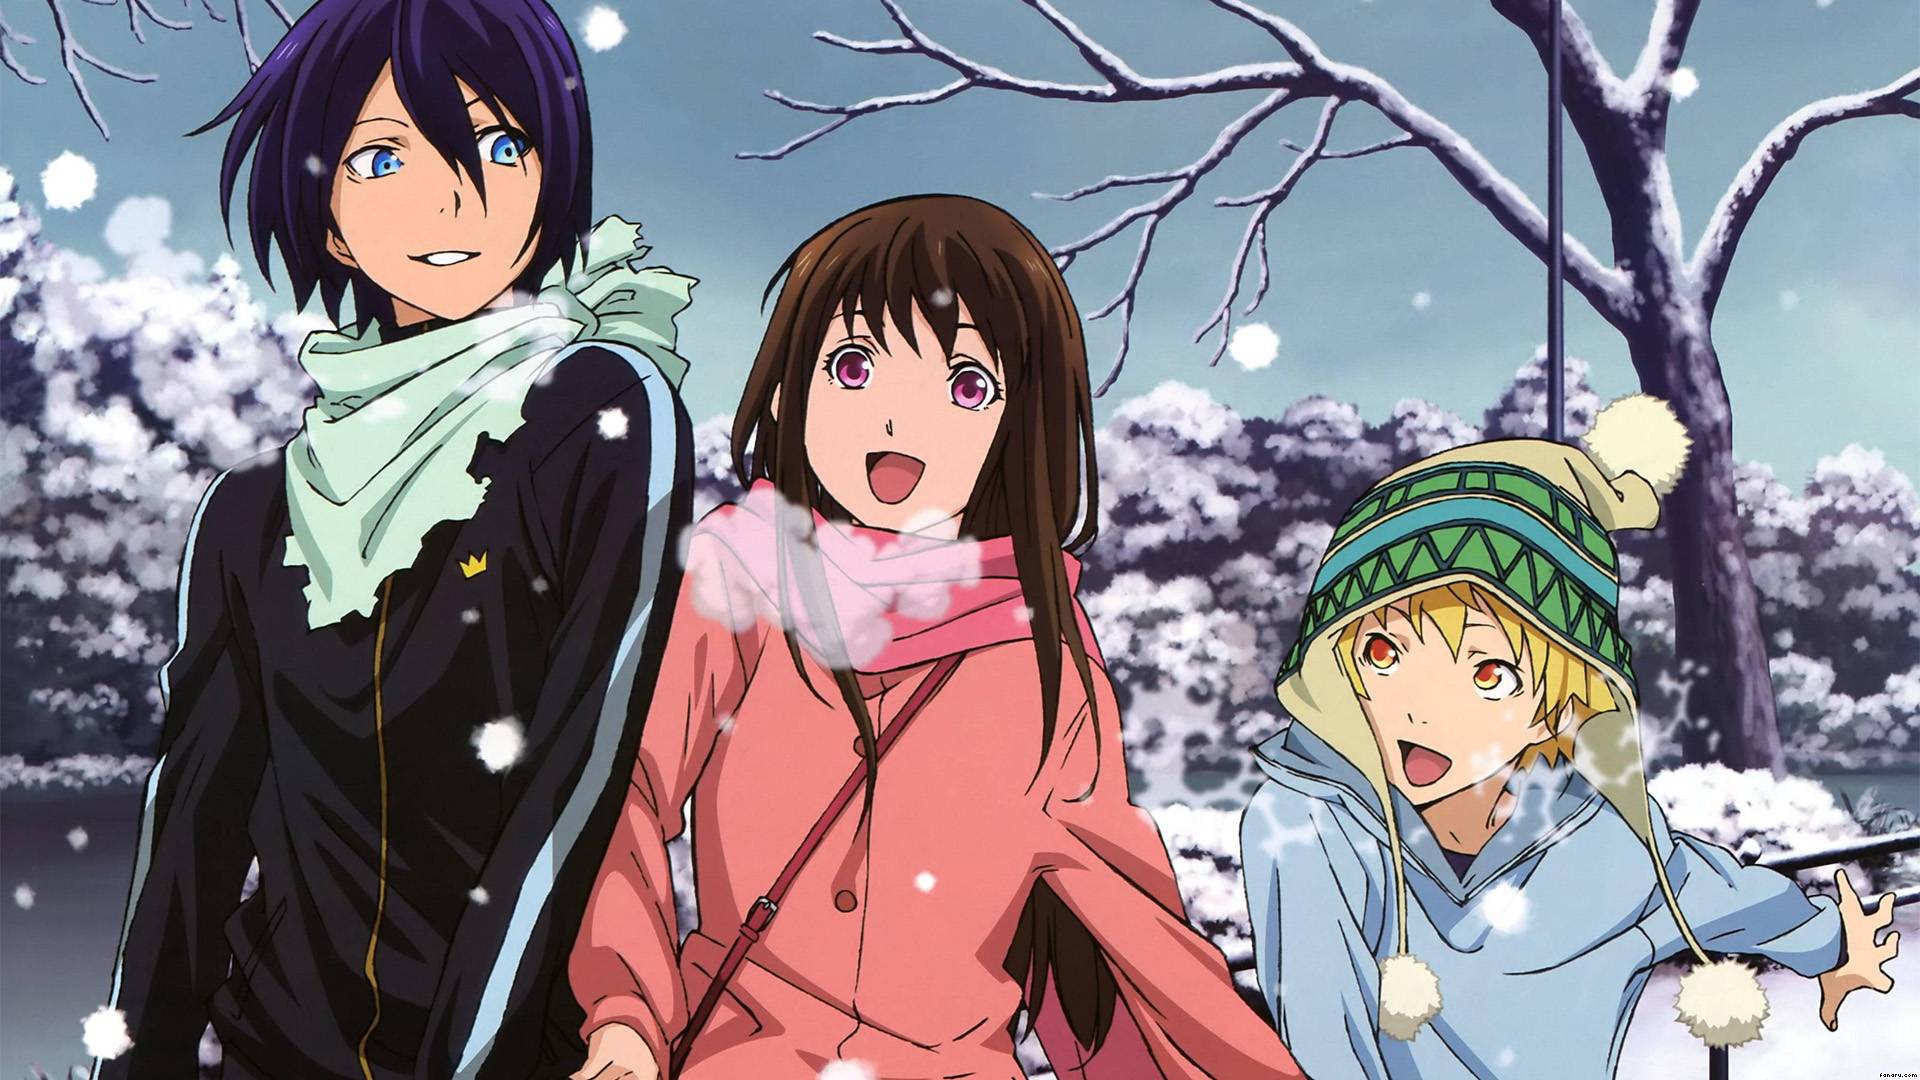 The three main characters of the anime Noragami, Yato, Hiyori, and Yukine stand together against a snowy backdrop.